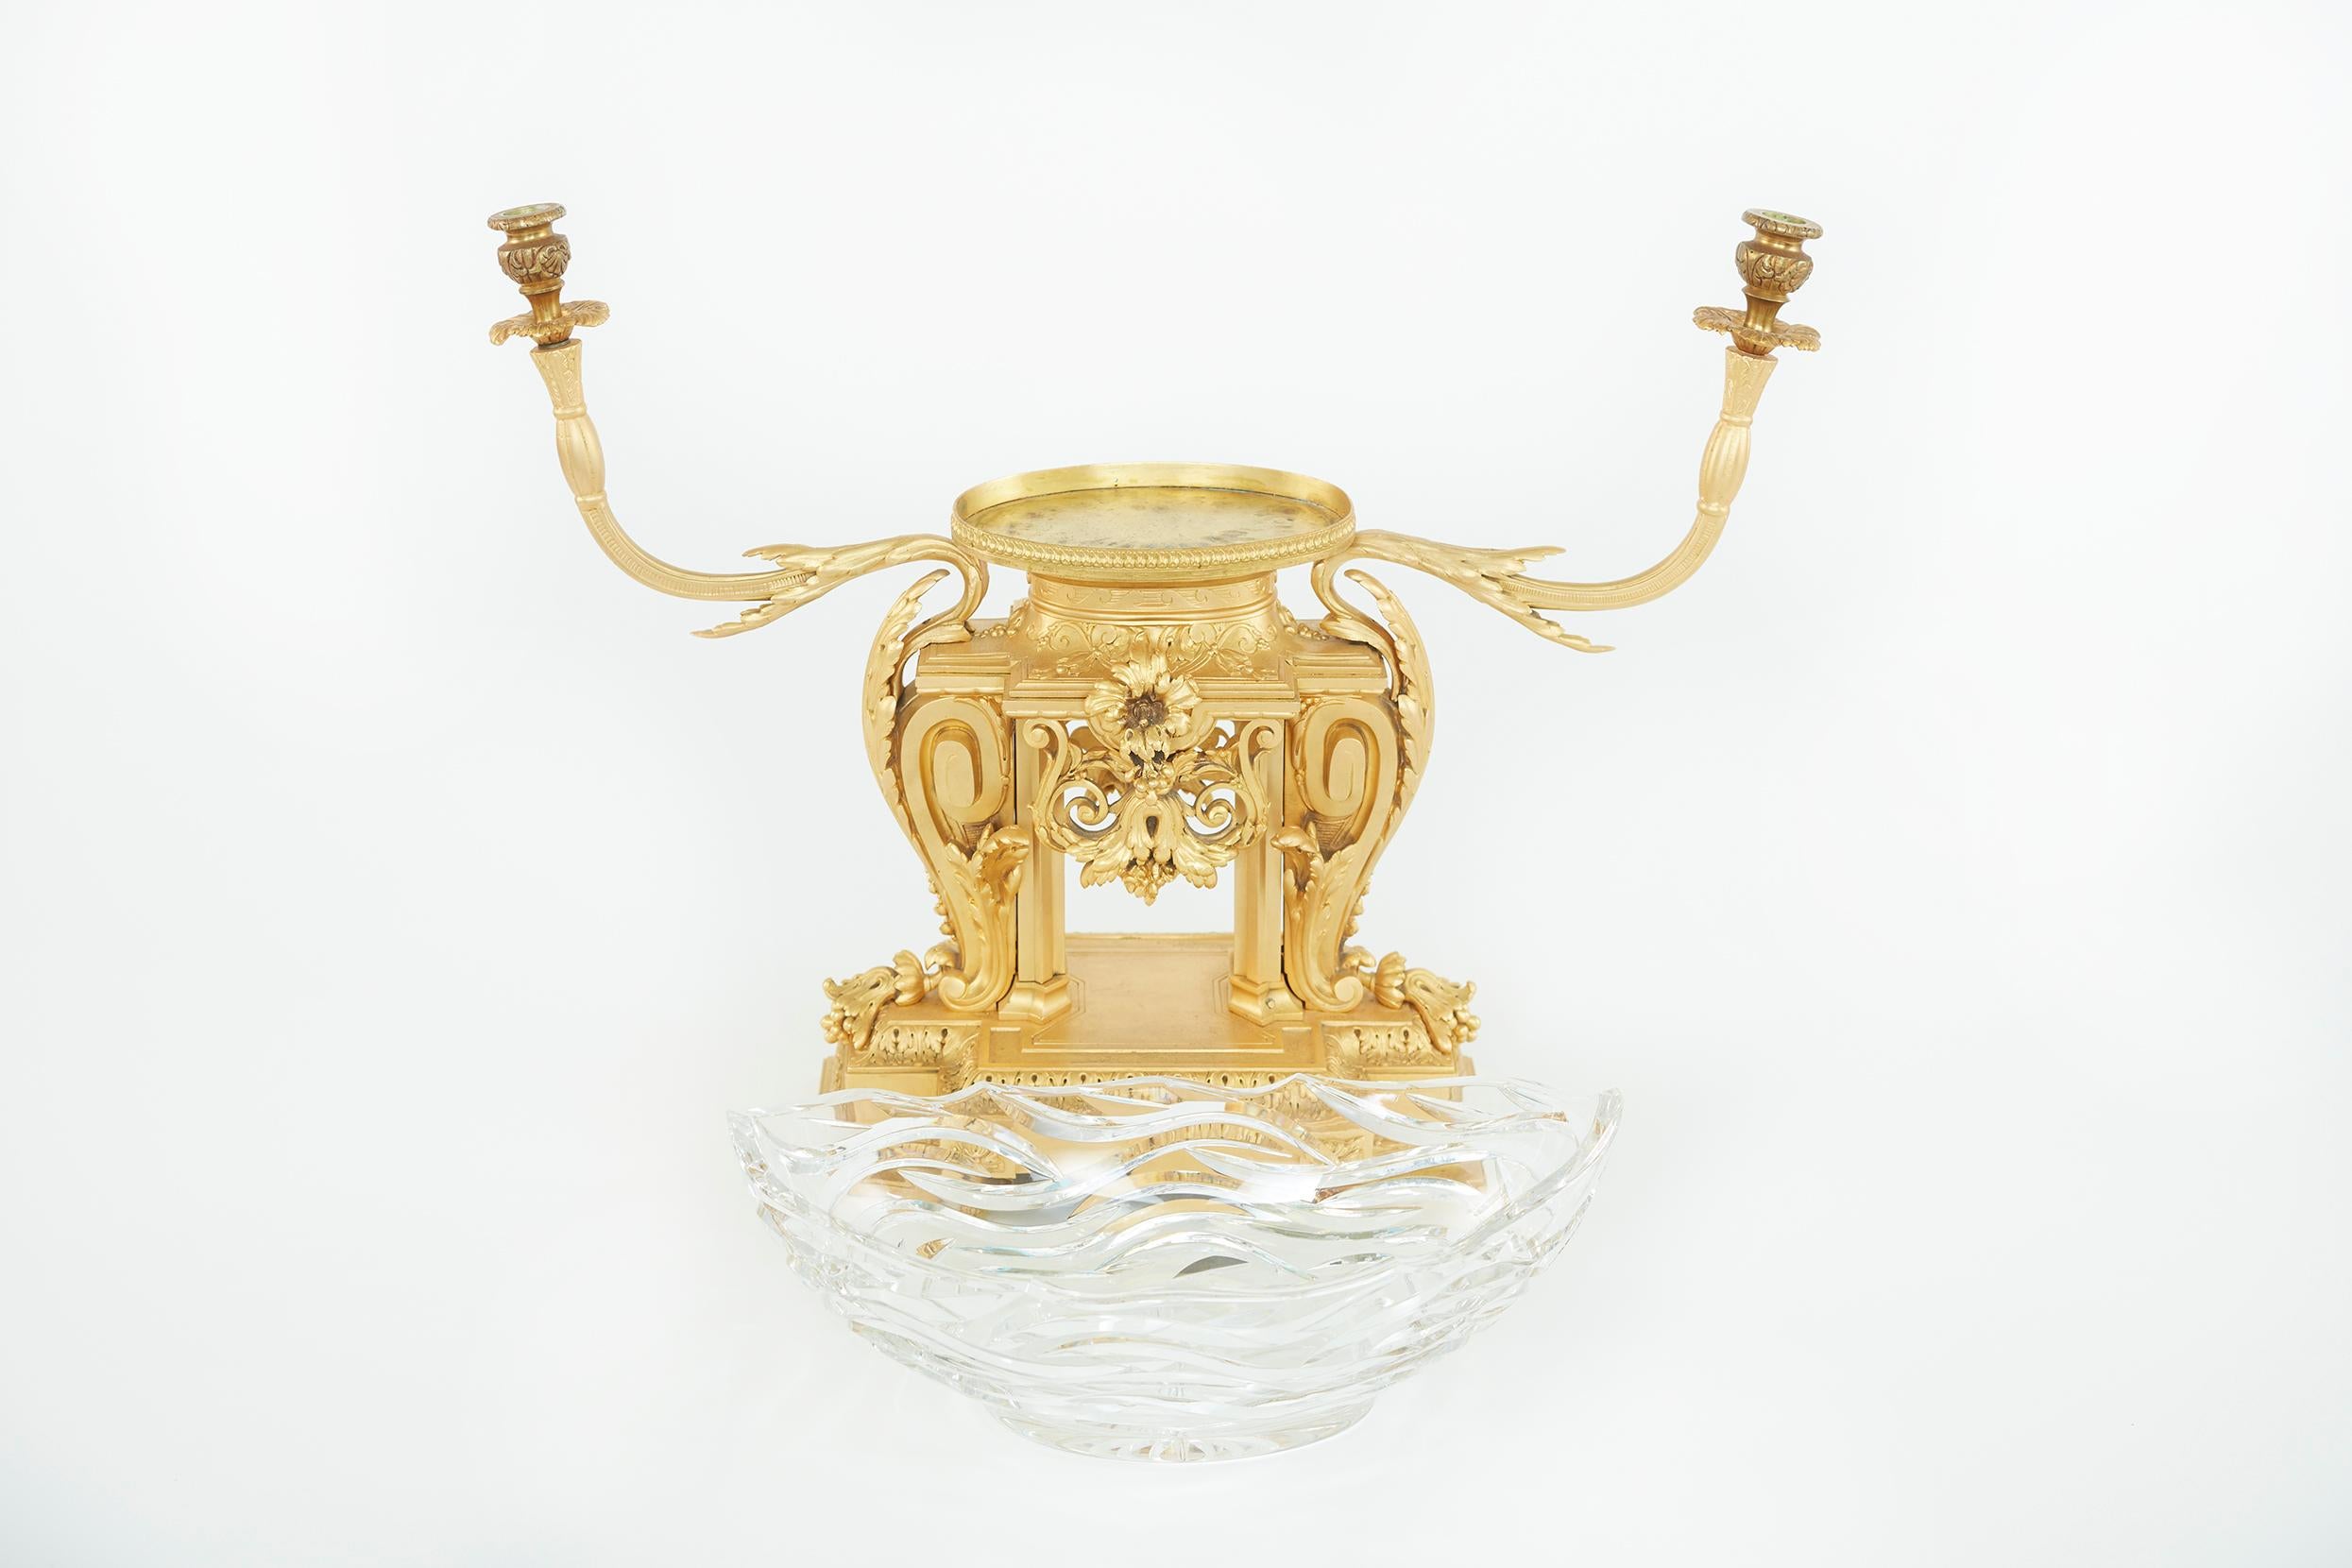 19th century gilt bronze mounted with cut glass holder decorative centerpiece with exterior design details. The centerpiece features a navette form bowl flanked by scrolling branches on a trestle base, cast with foliage. The breakfronted plinth on